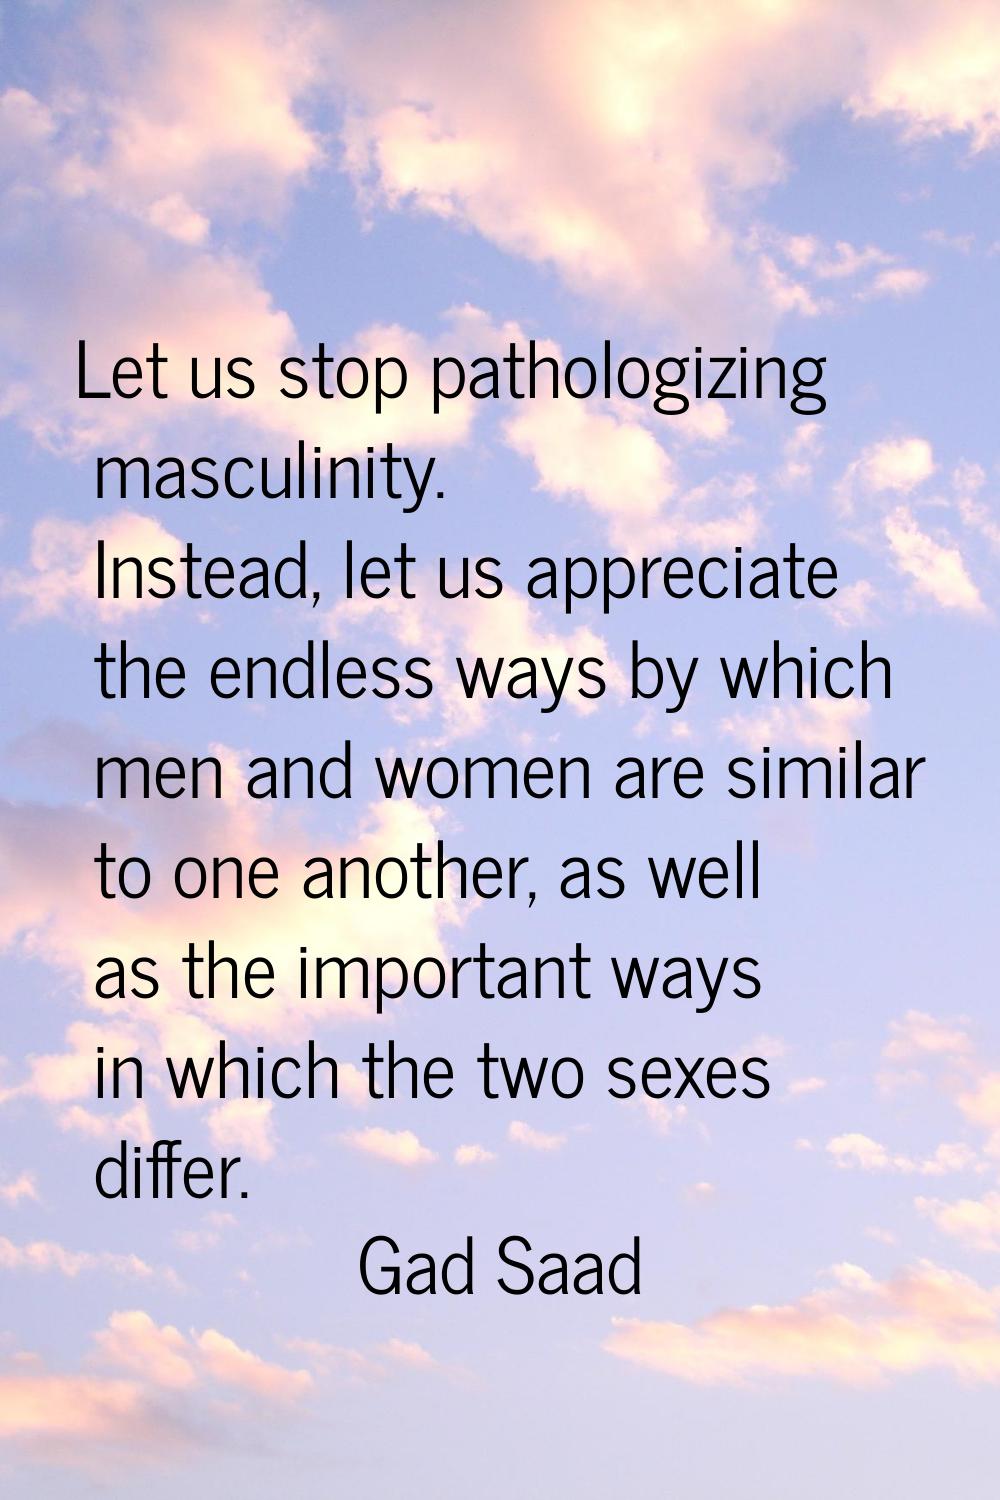 Let us stop pathologizing masculinity. Instead, let us appreciate the endless ways by which men and